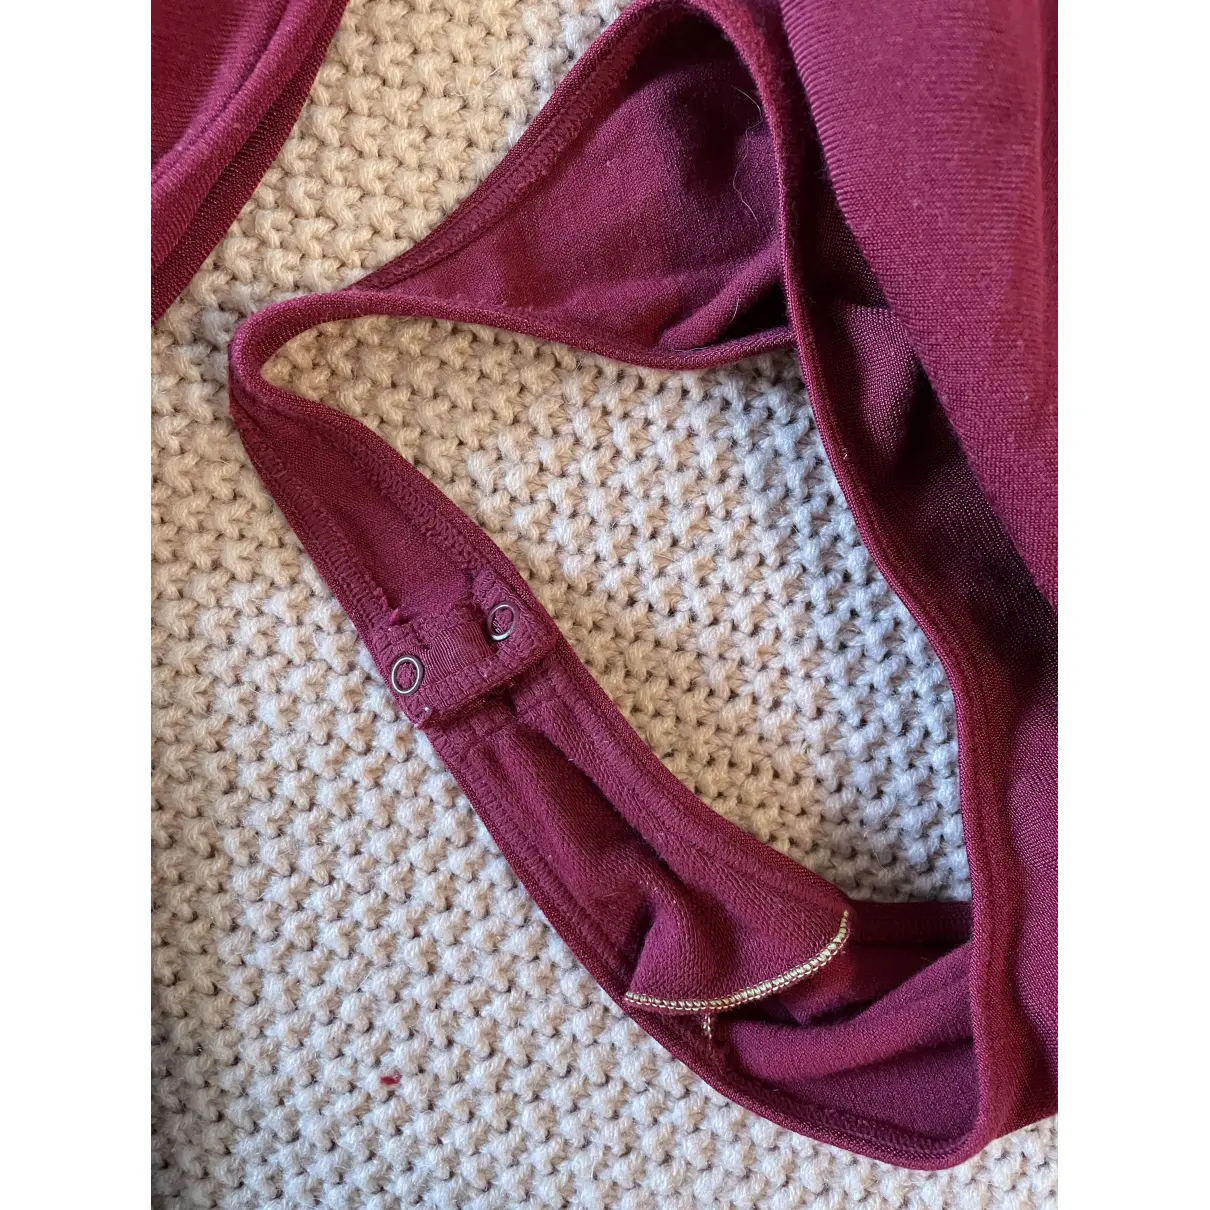 Burgundy Synthetic Top Wolford